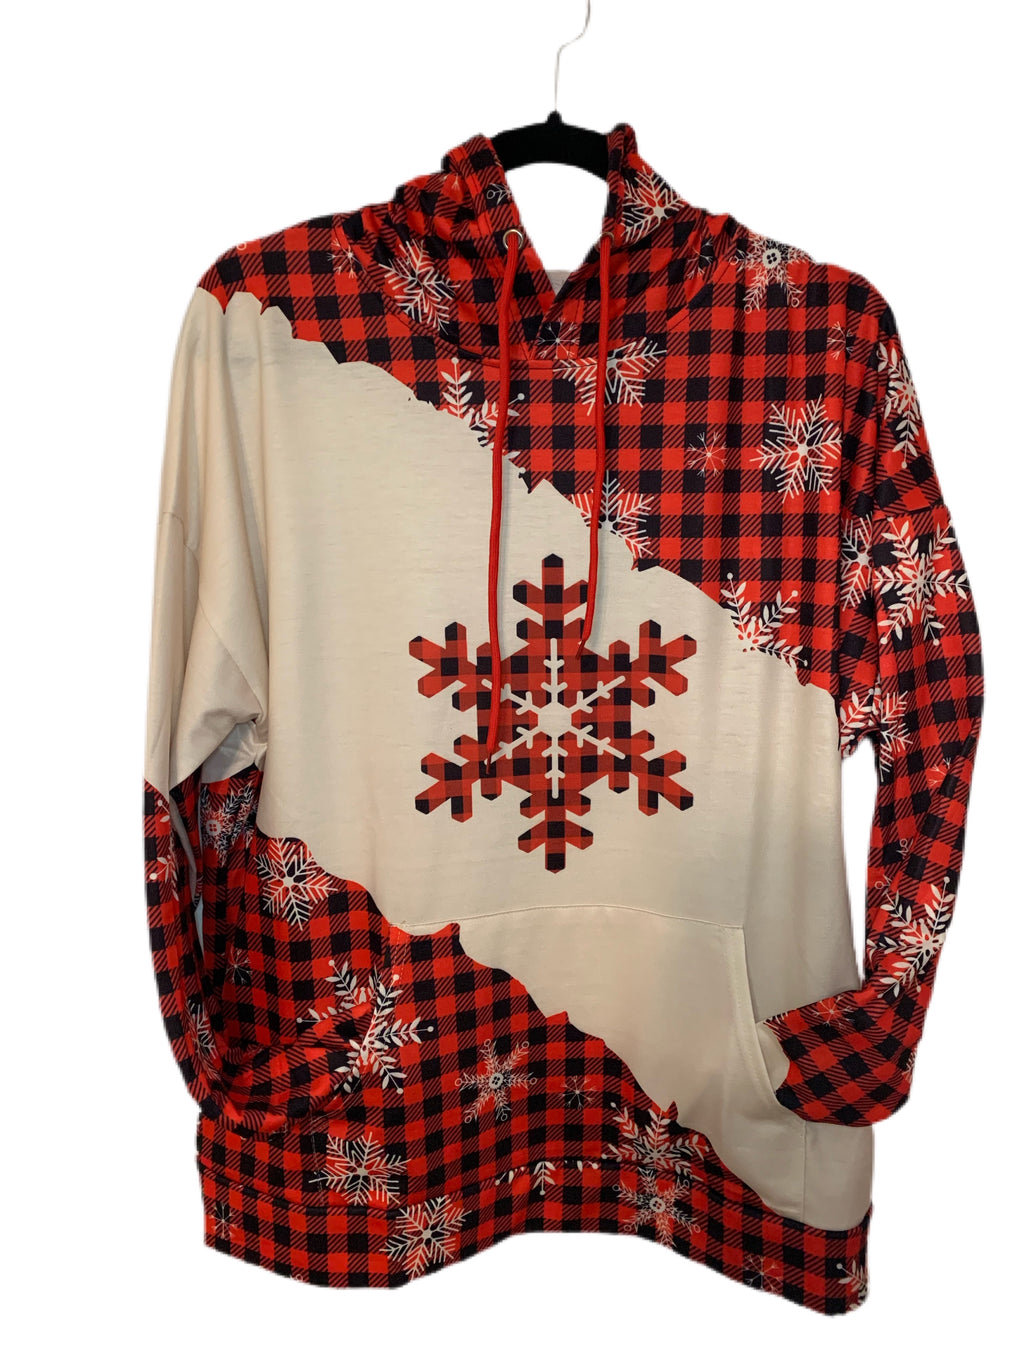  •Red plaid long sleeve with snowflake print and hooded back  •Pouch pocket on the front  •Lightweight knit hoodie  Runs true to size guide ! 